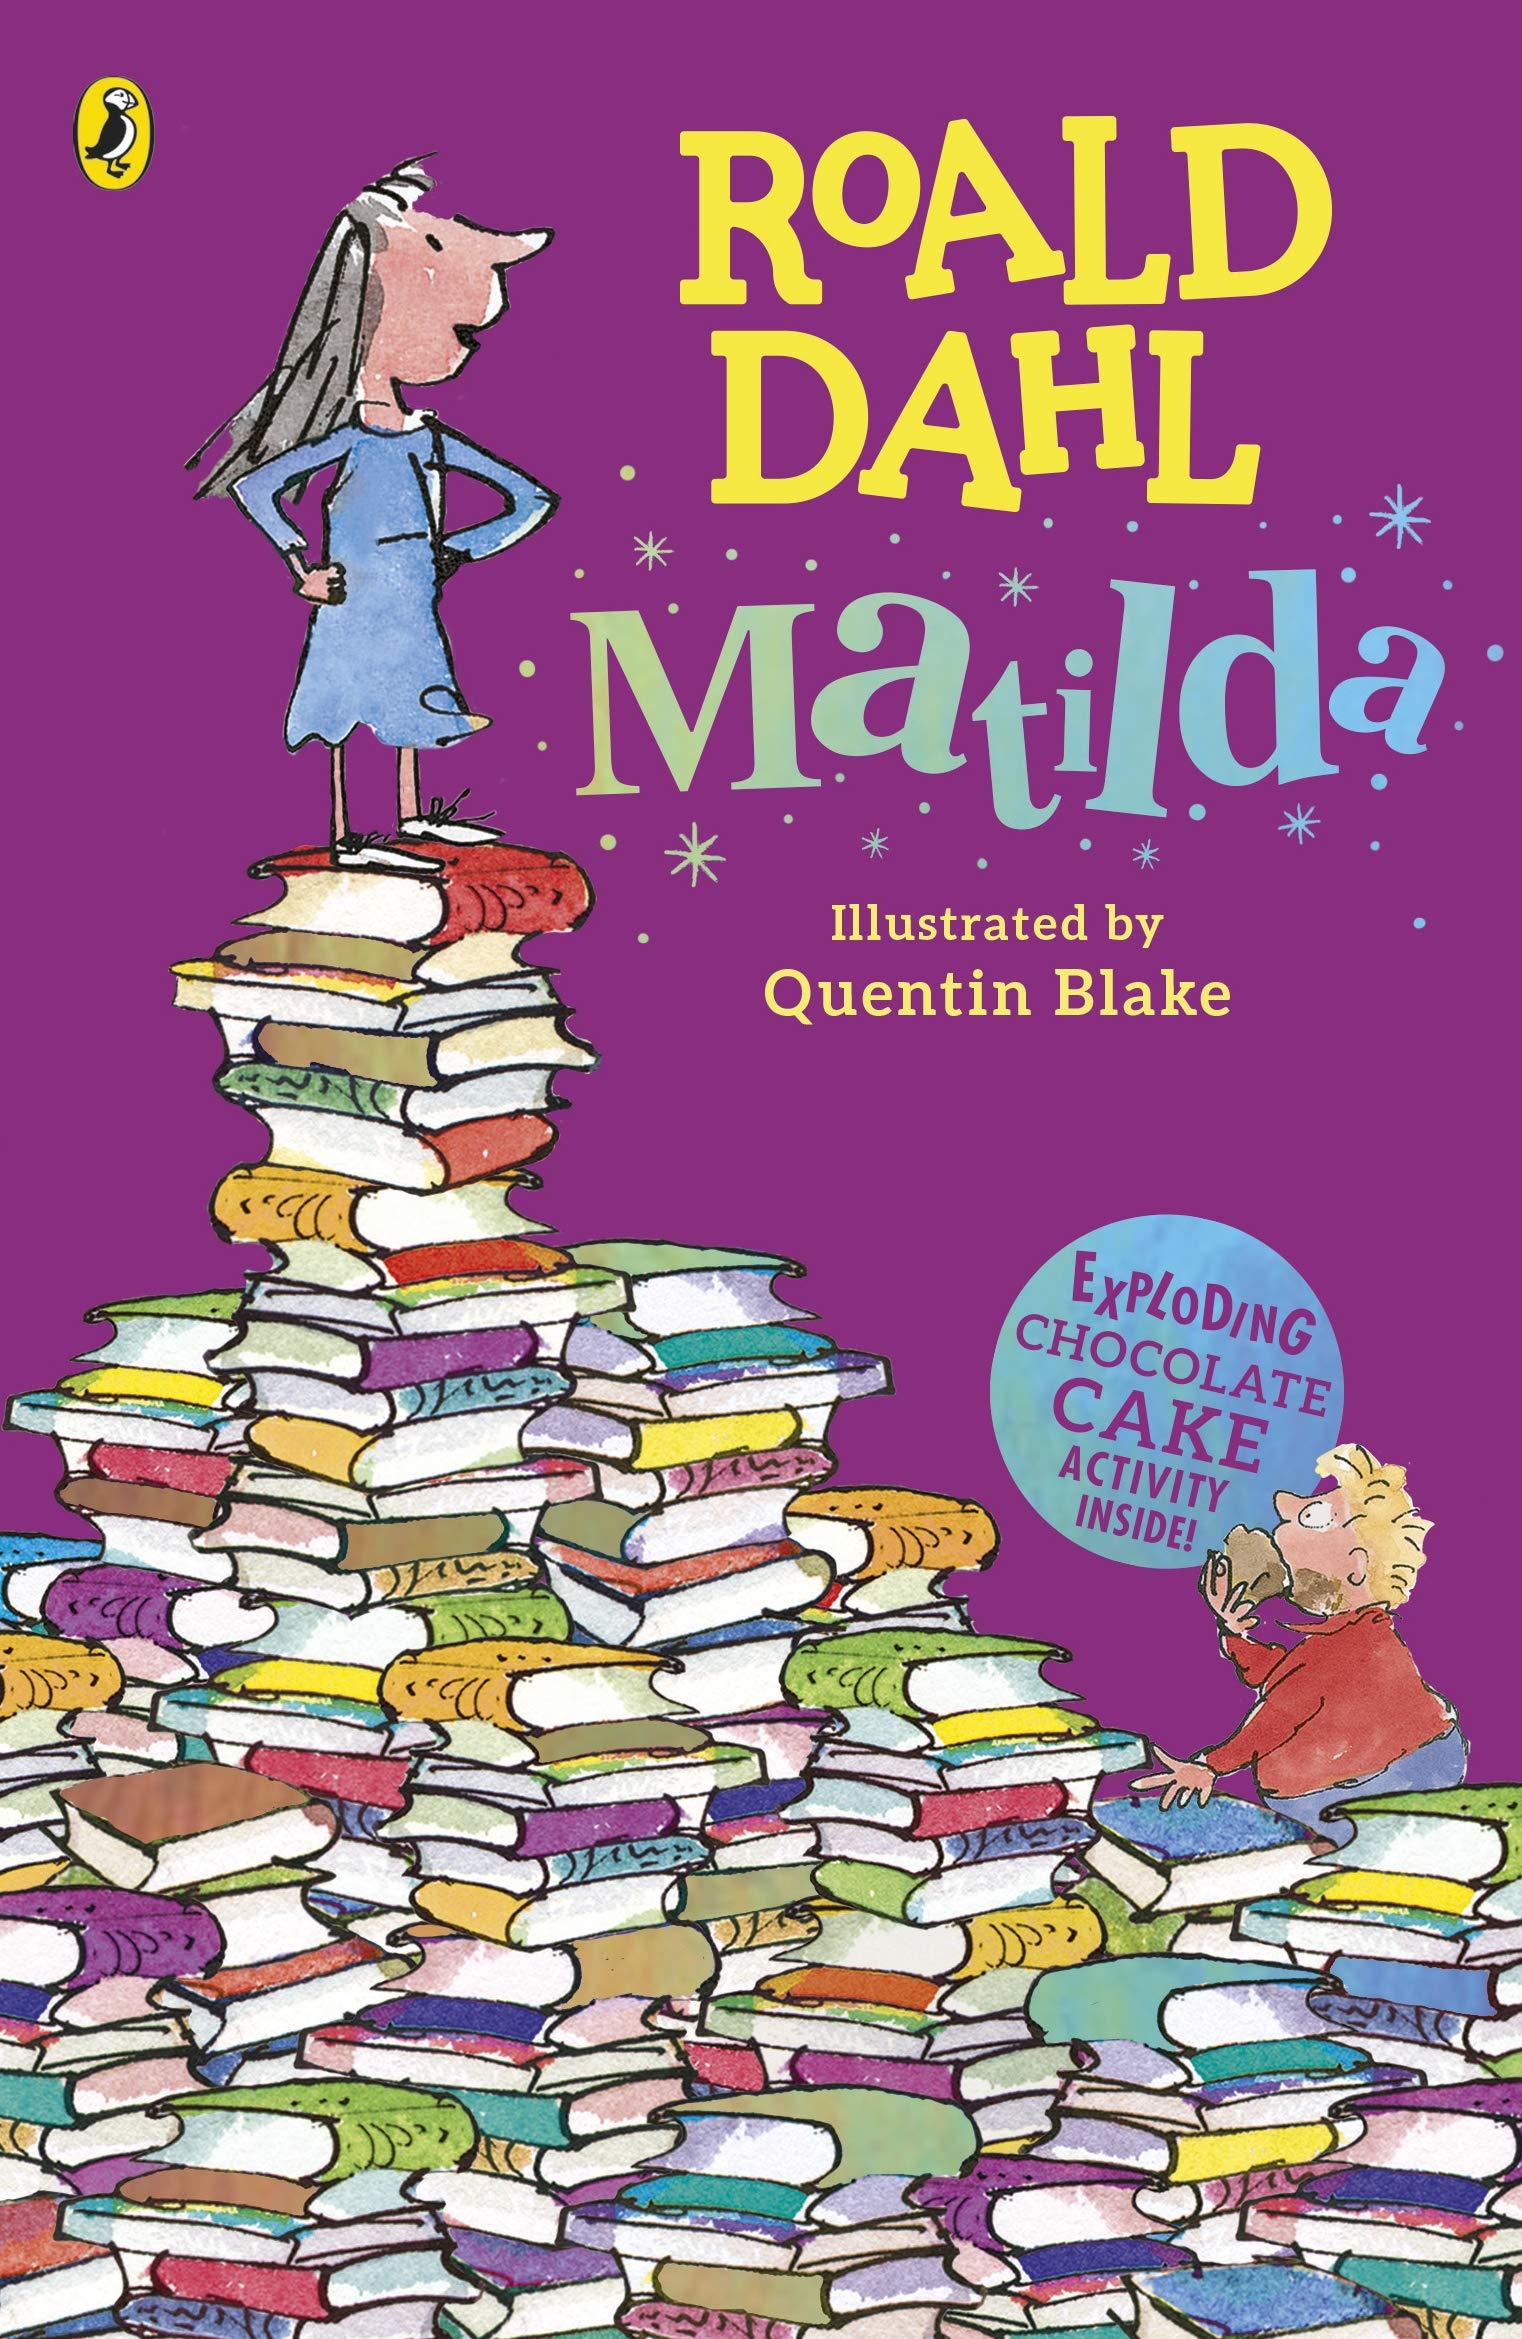 book review of the book matilda